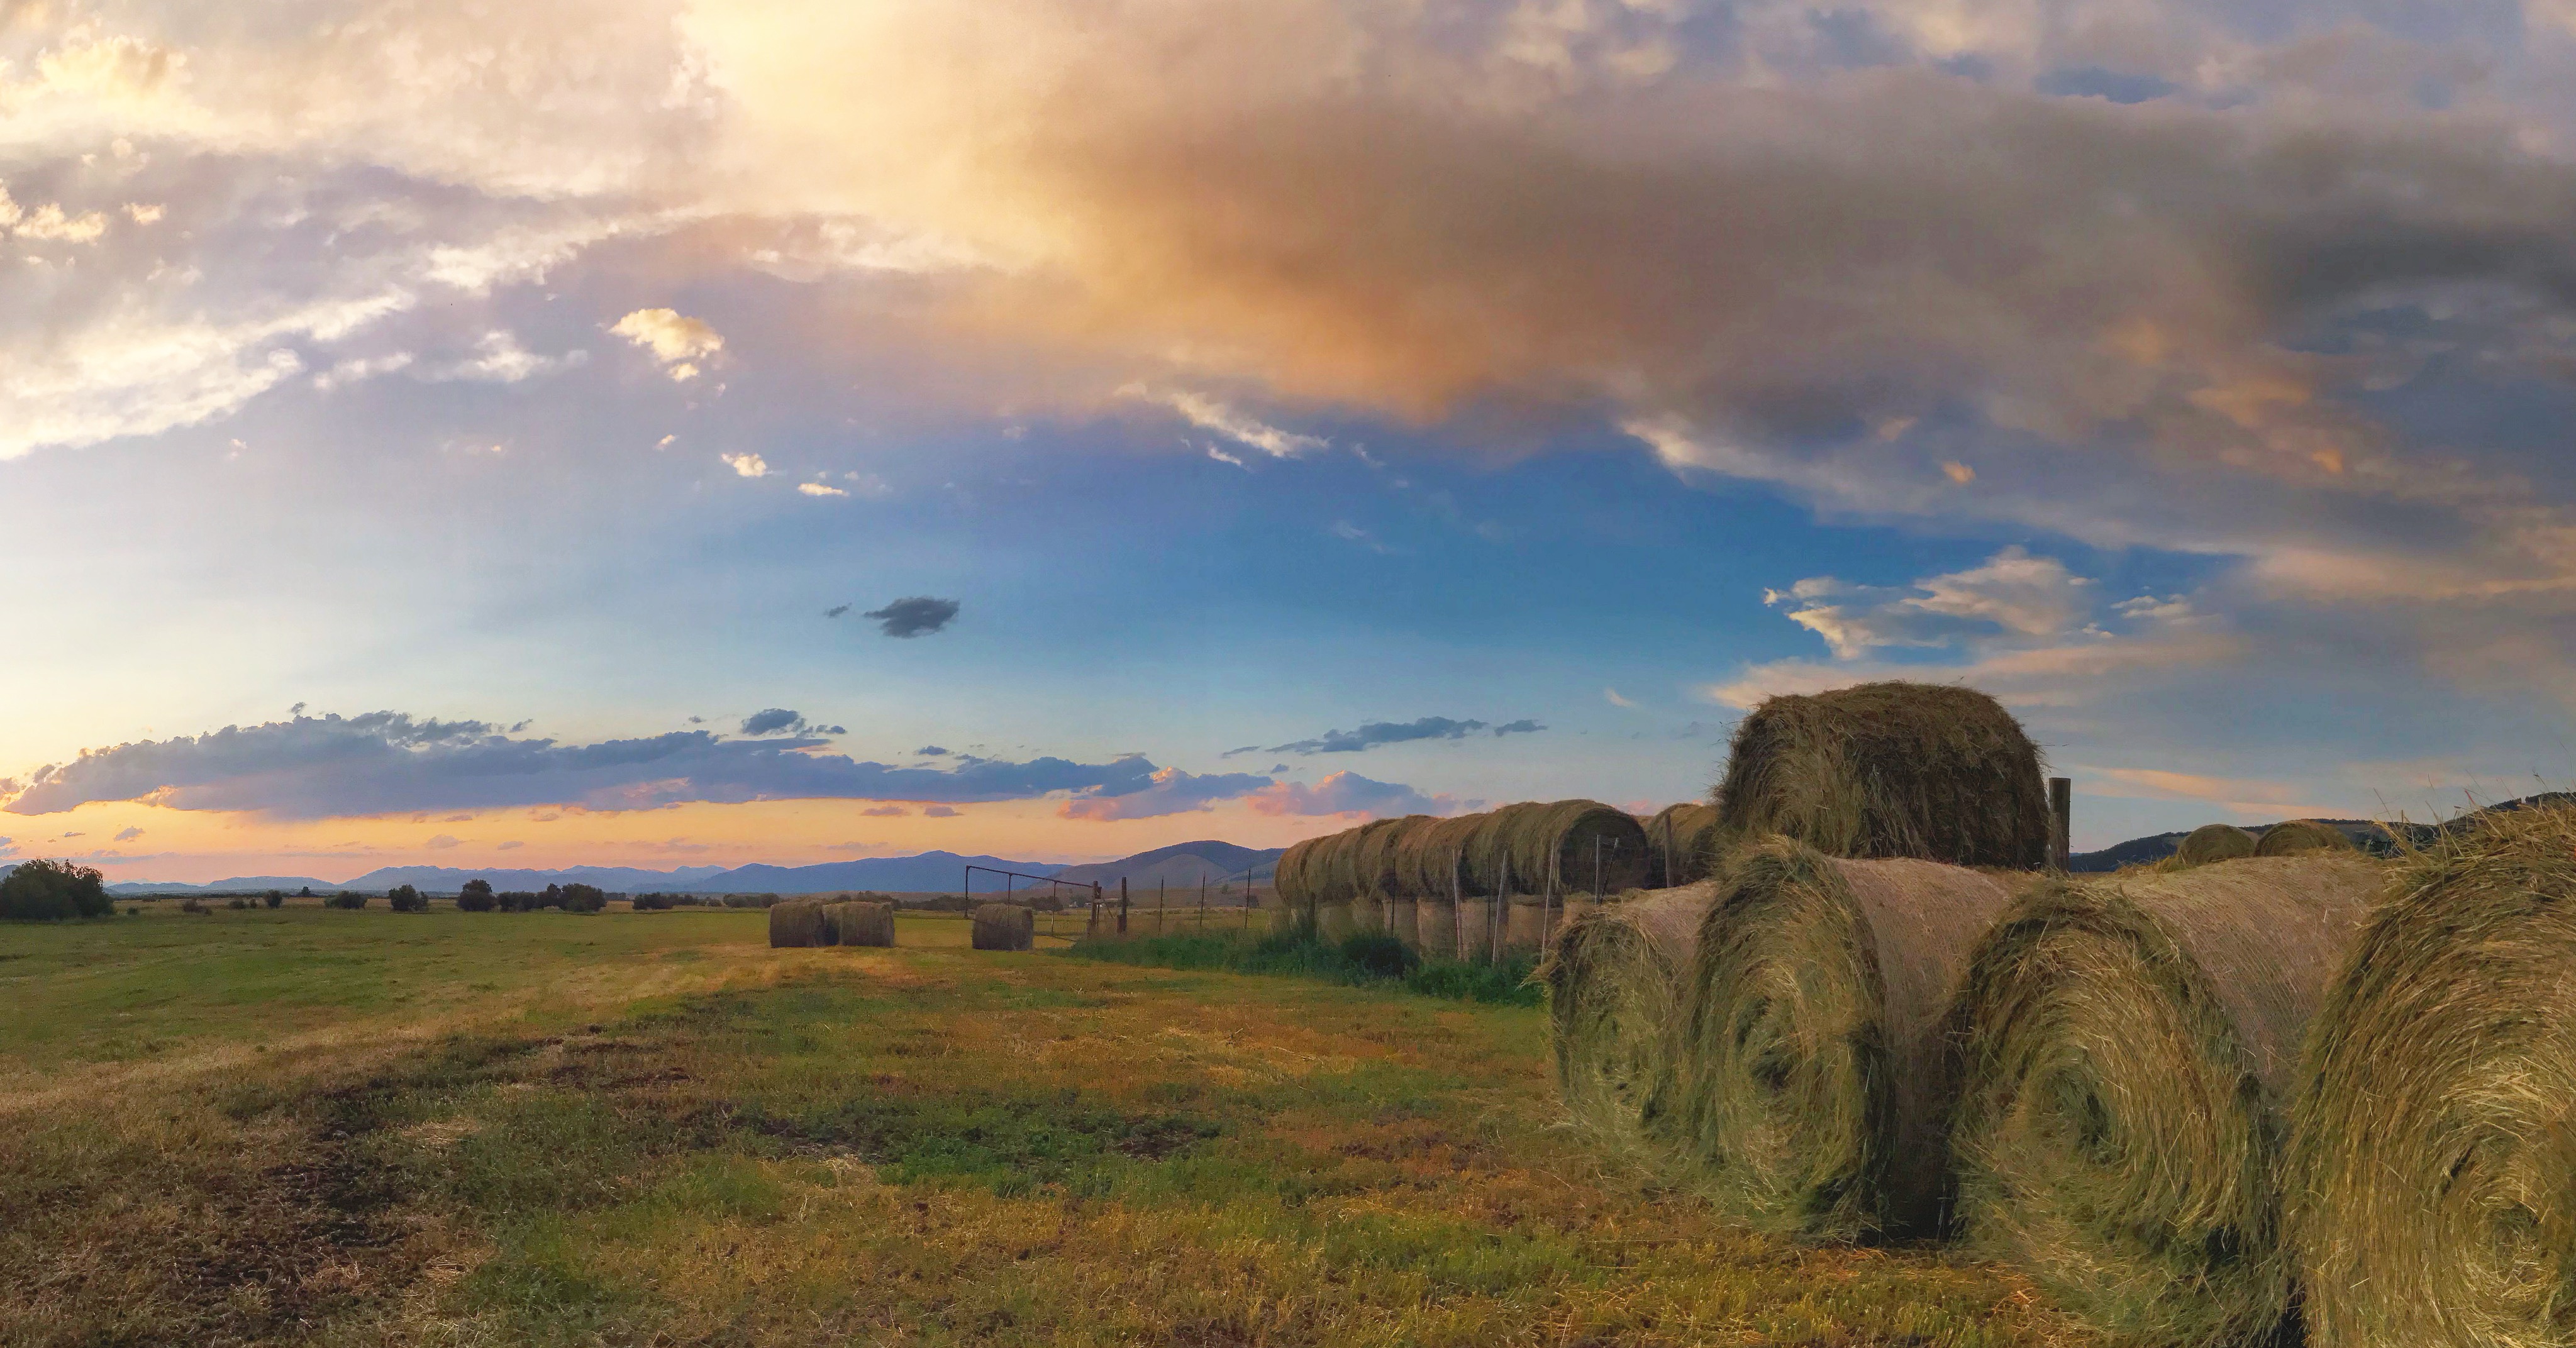 Montana ranch landscape with haybales